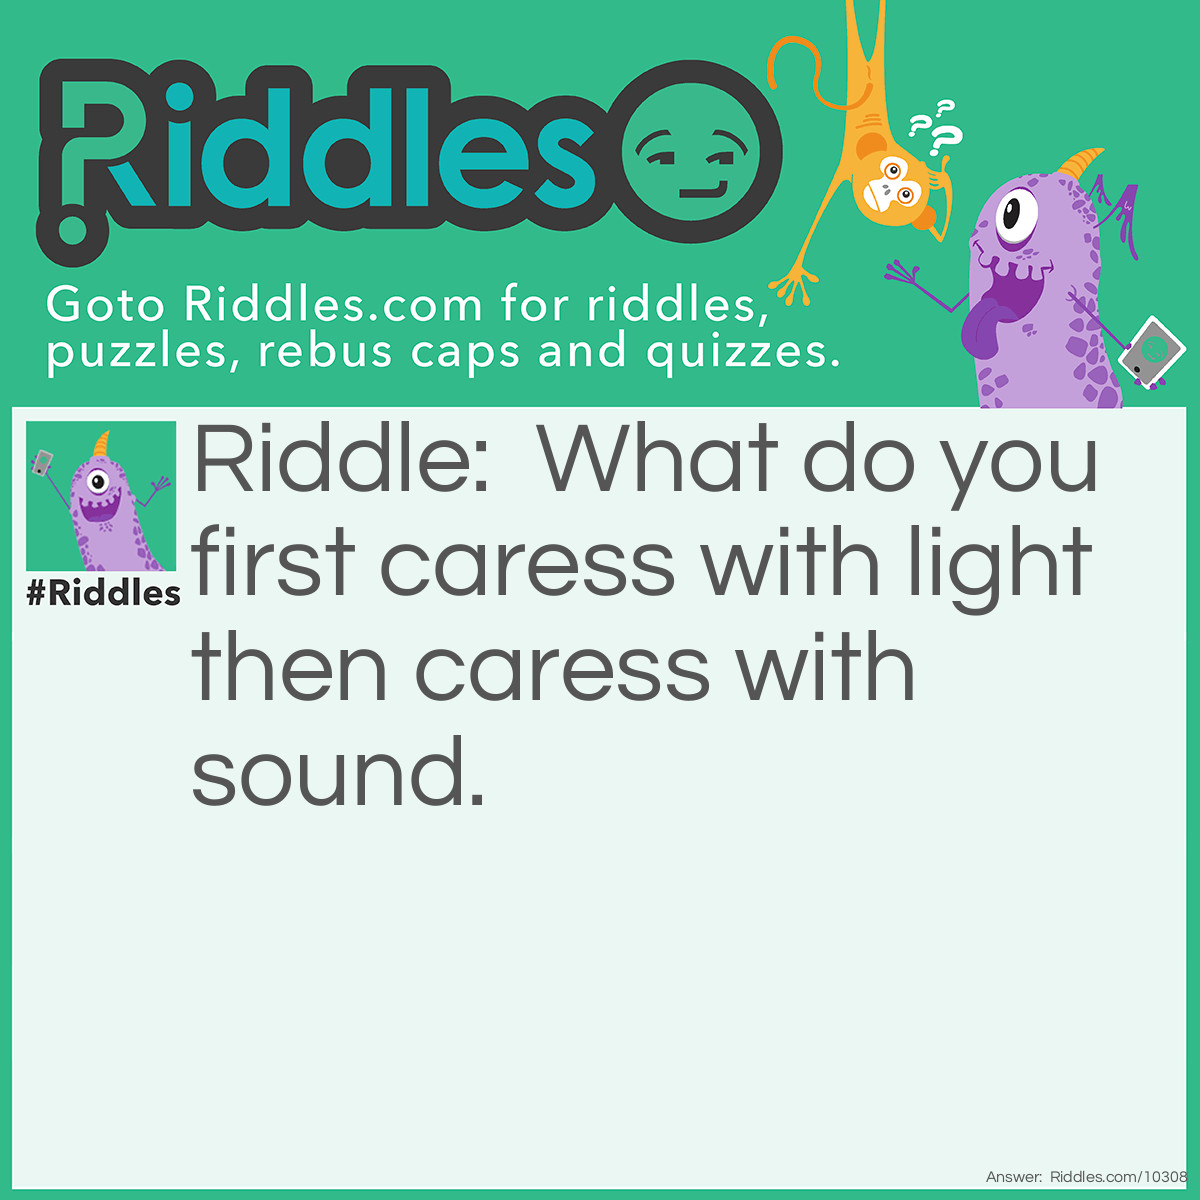 Riddle: What do you first caress with light then caress with sound? Answer: The Living Room.